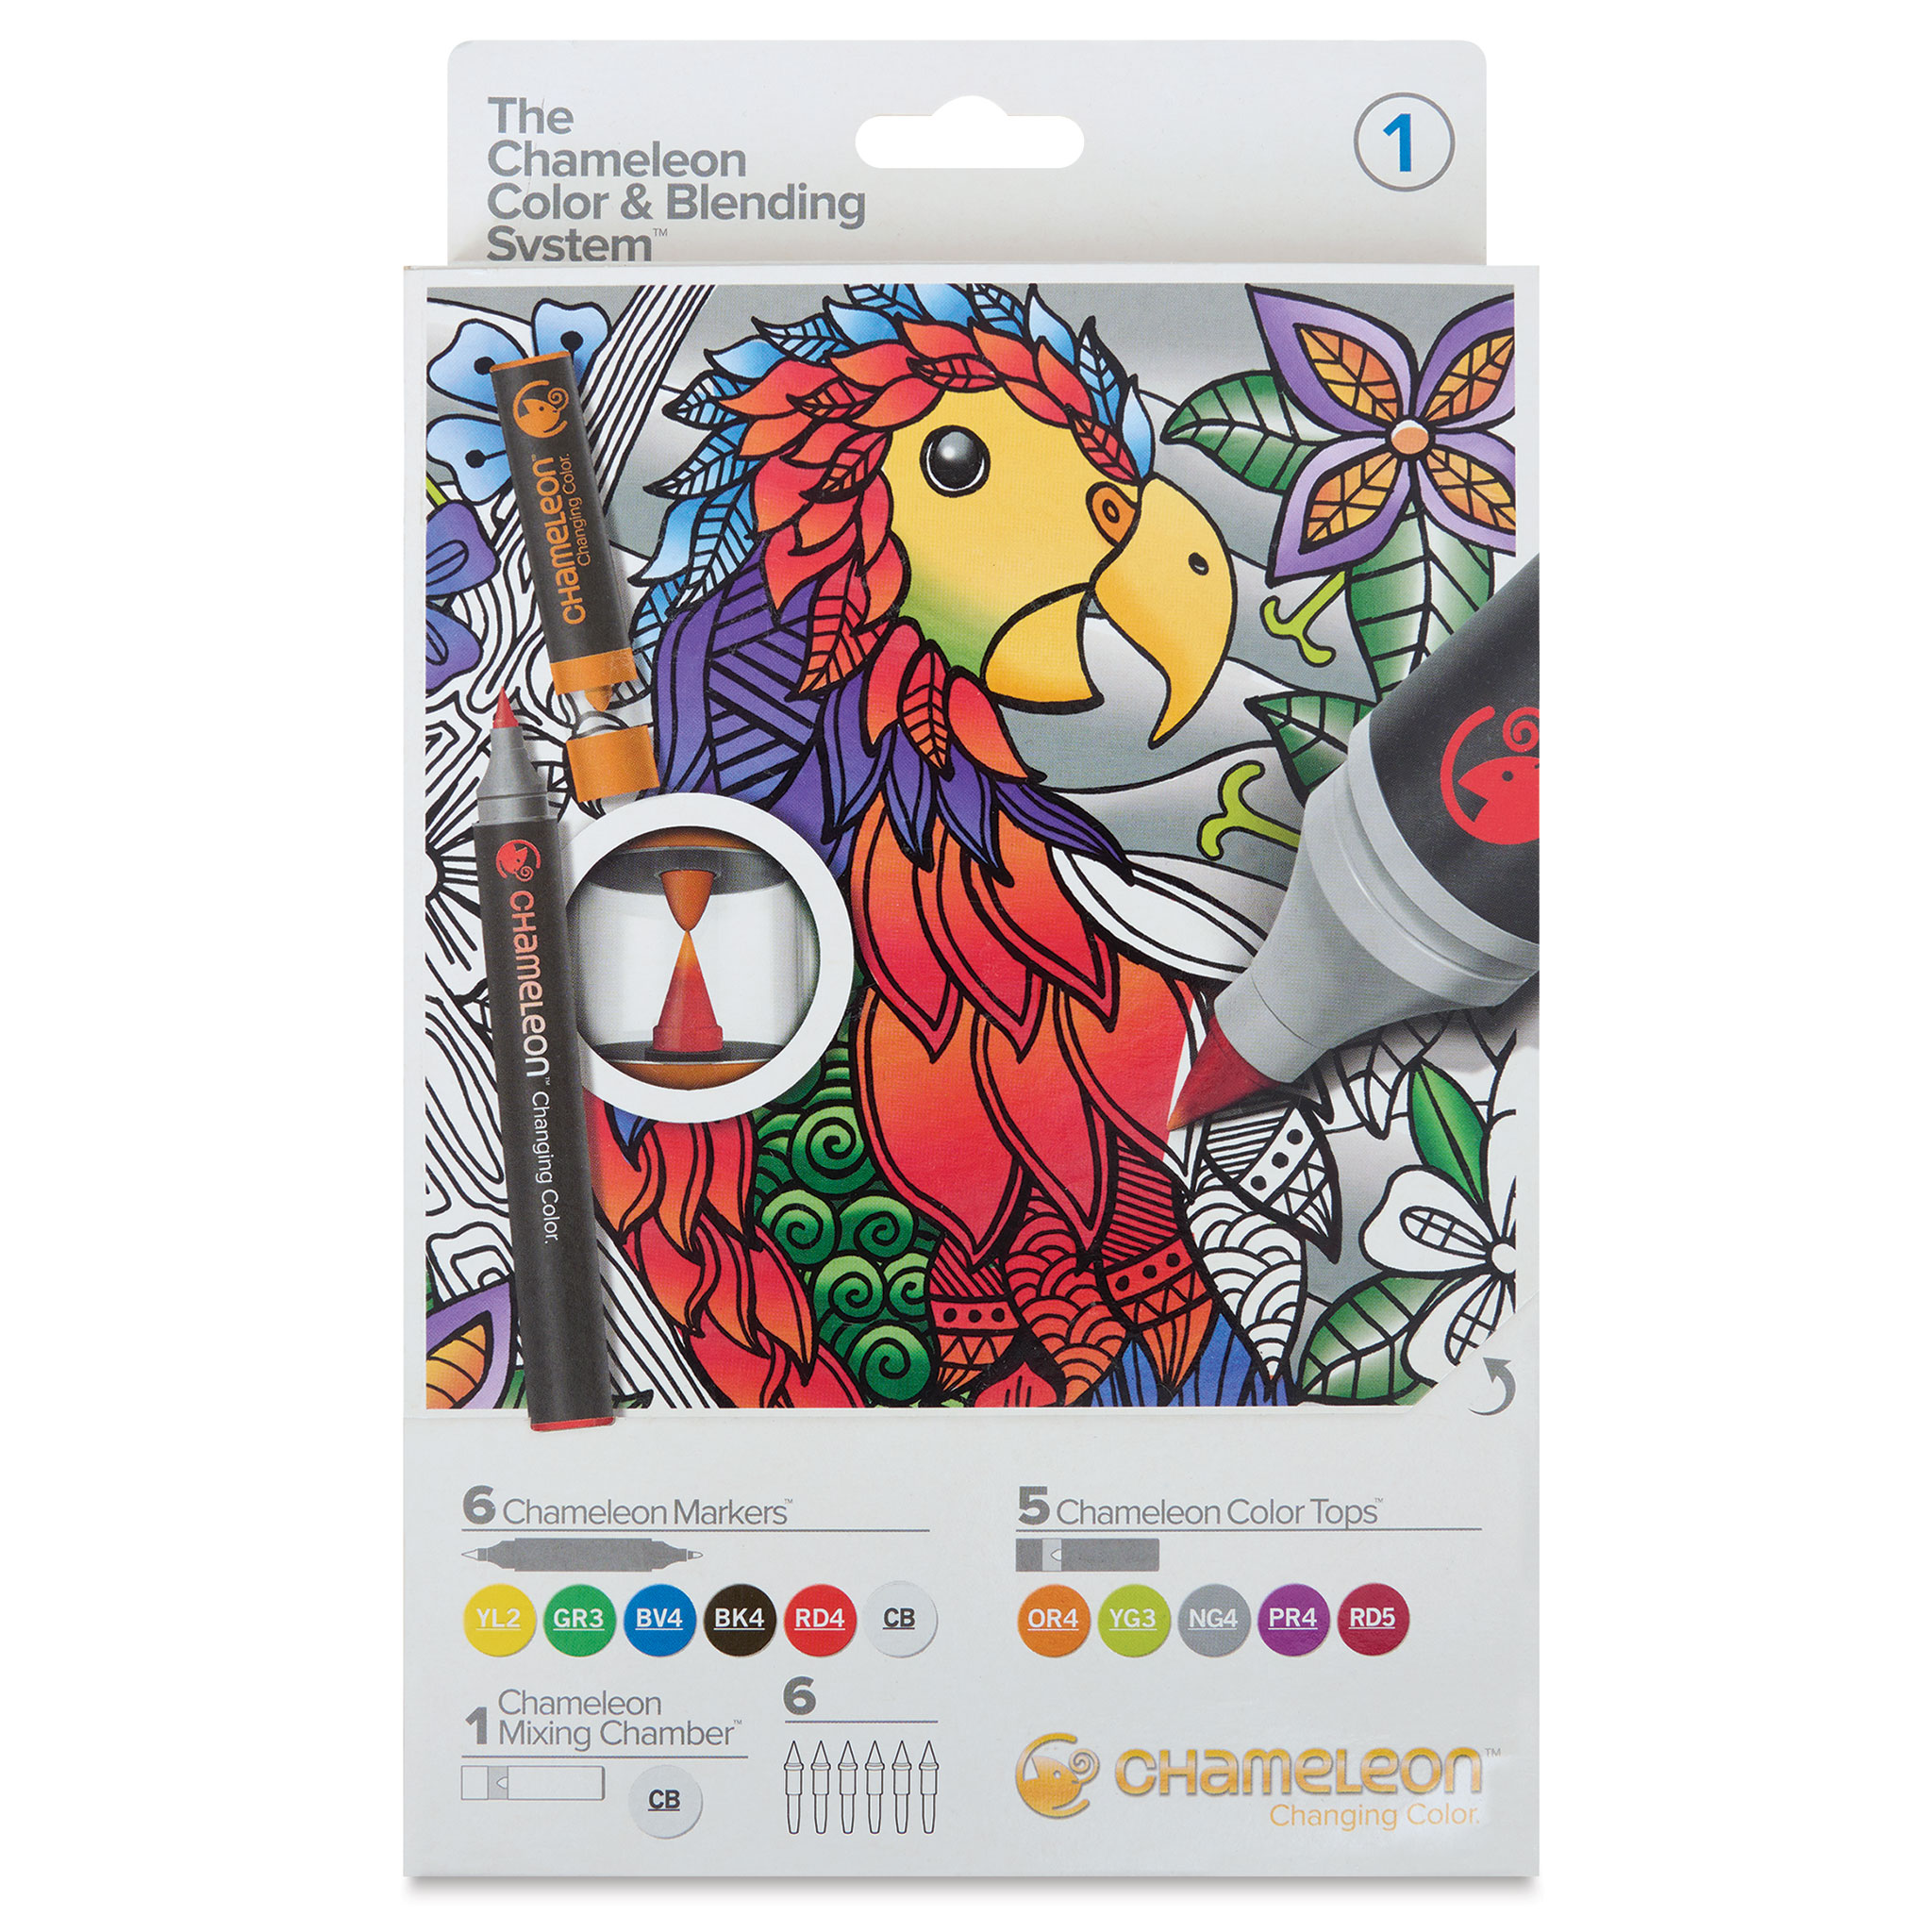 Chameleon Color and Blending System Set 7 with Markers and Color Tops